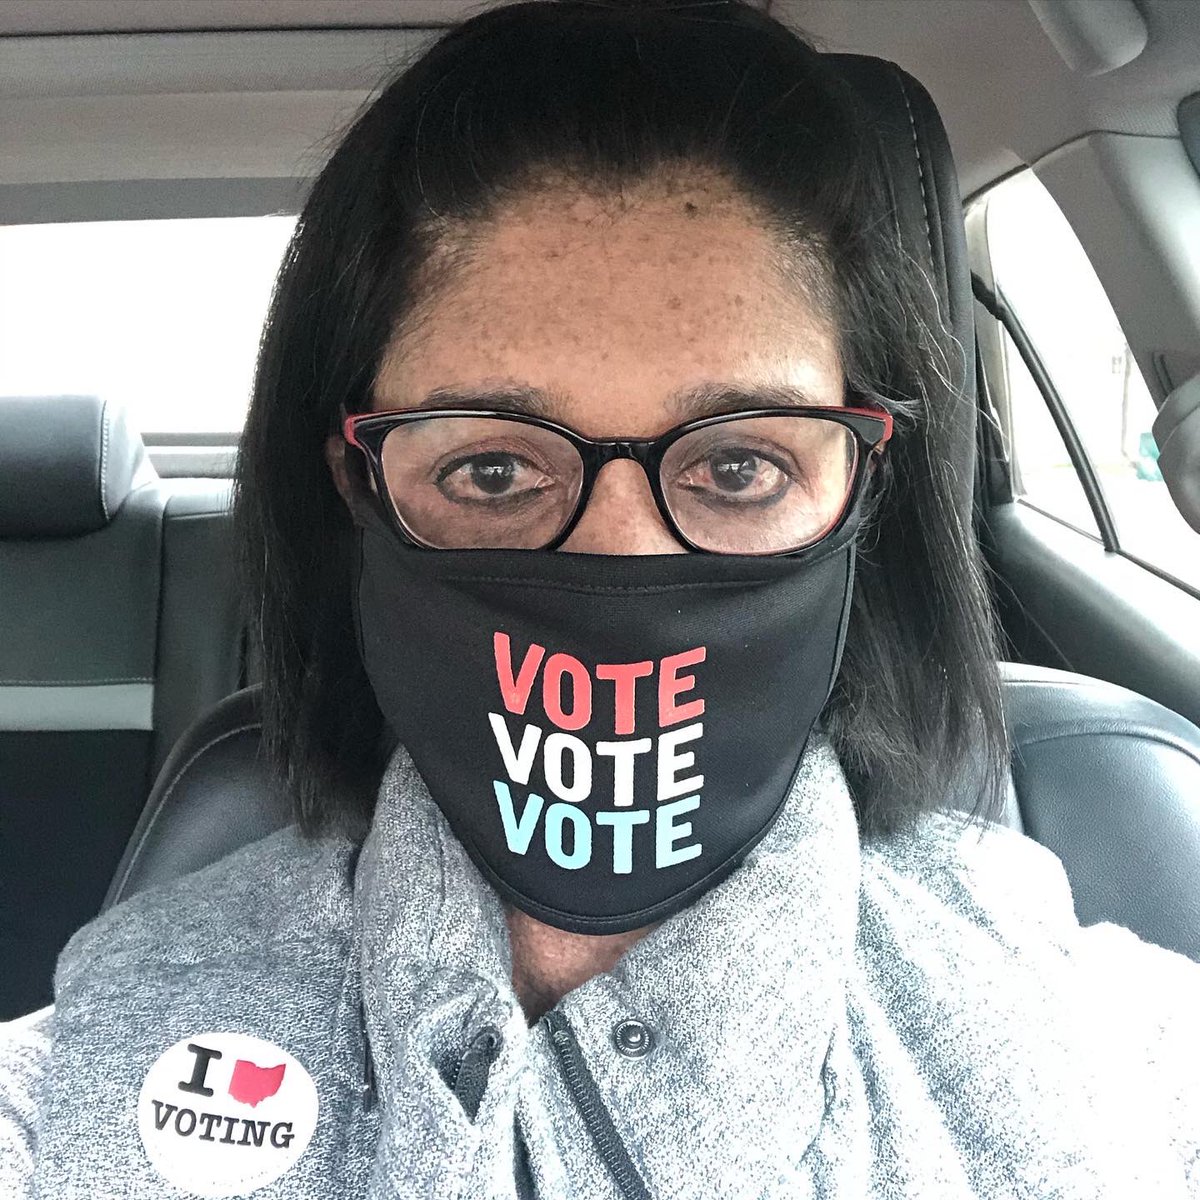 Today, #iVoted!

I used my vote to #VoteKids!
I used my vote to #VoteHealth!
I used my Vote to Vote for #BidenHarris!

Thanks to @cuyahogaboe for making the #AbsenteeBallot Drop-off Easy & Organized. 

If you haven’t already, #MakeAPlanToVote!